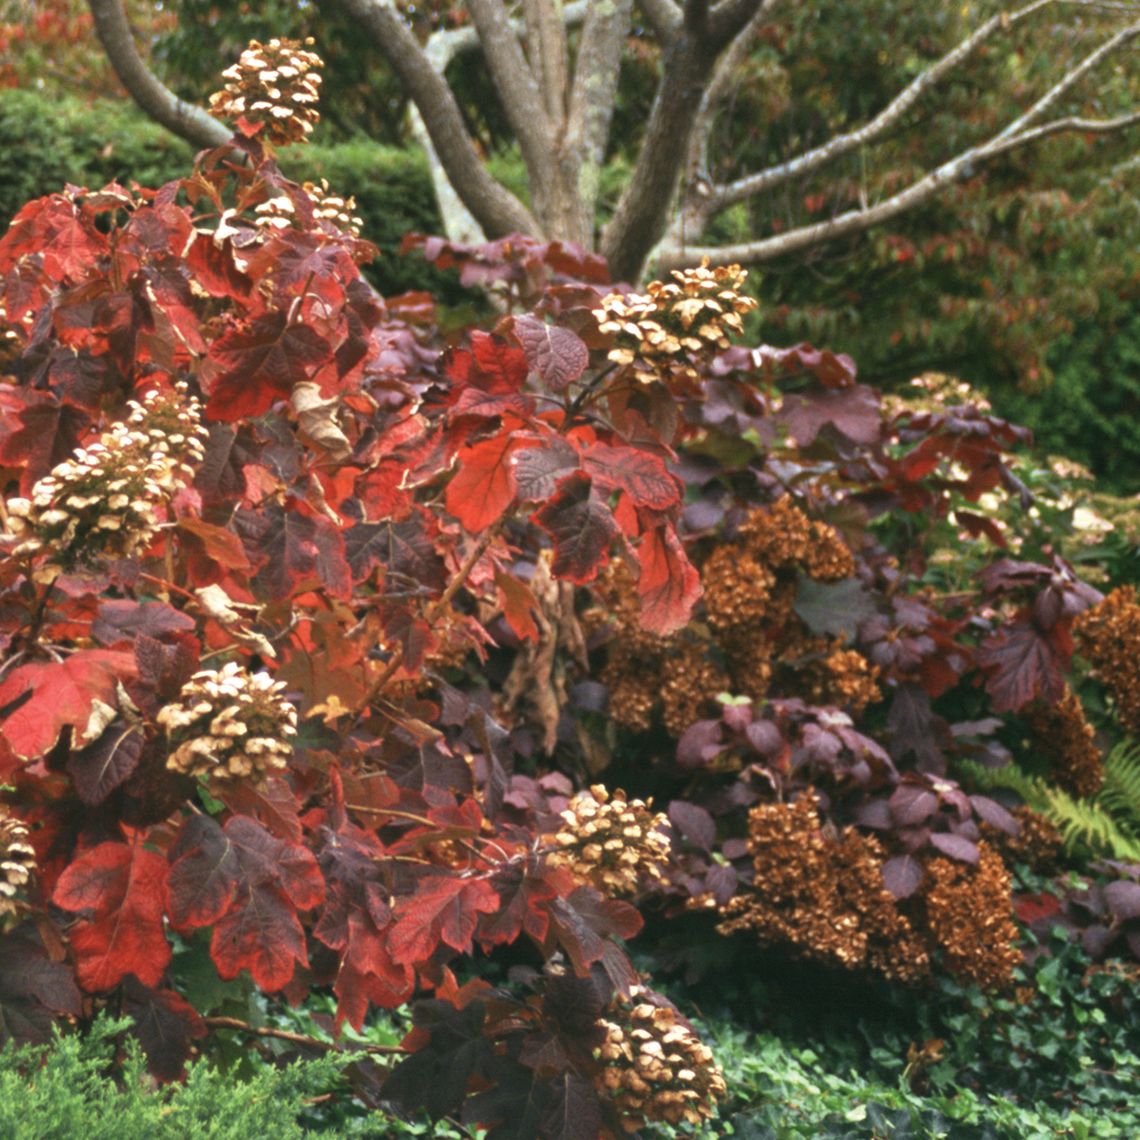 Snow Queen oakleaf hydrangea in the landscape displaying red and burgundy fall color